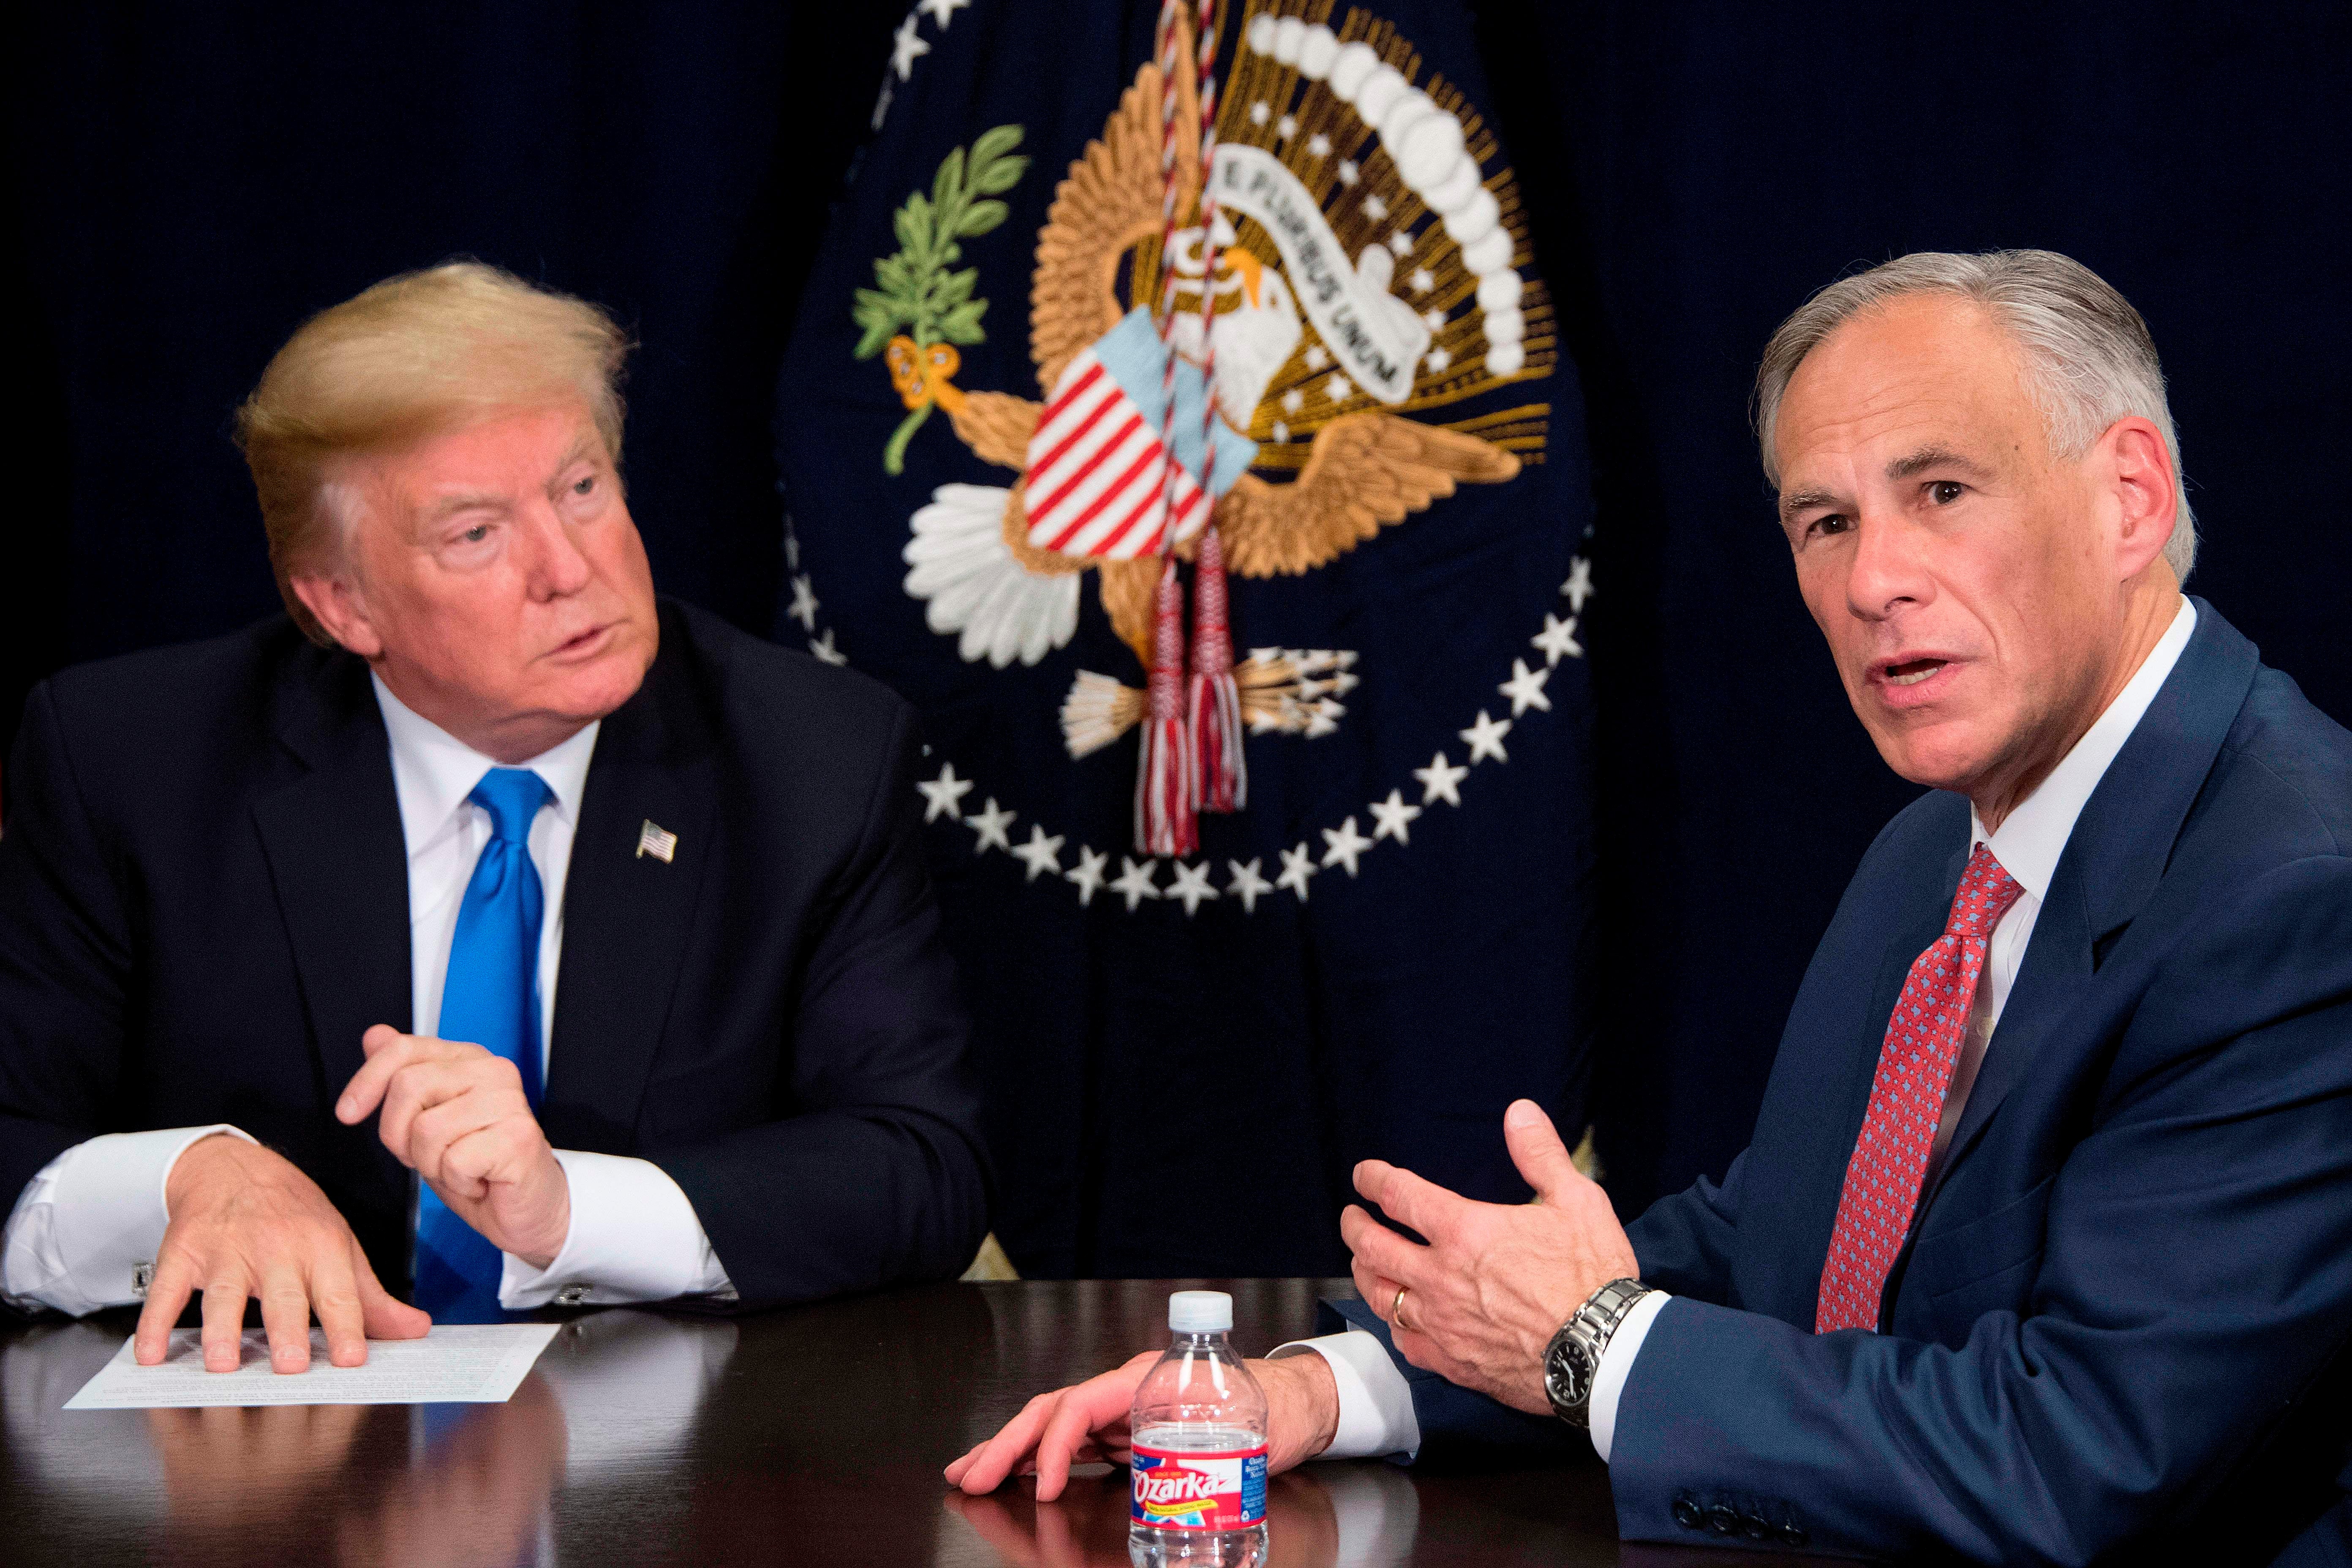 Texas Governor Greg Abbott (right) speaks with then-US President Donald Trump (left) during a briefing on hurricane relief efforts in Dallas, Texas, on 25 October, 2017. Mr Abbott has said he plans to raise funds to build more border wall between the US and Mexico.